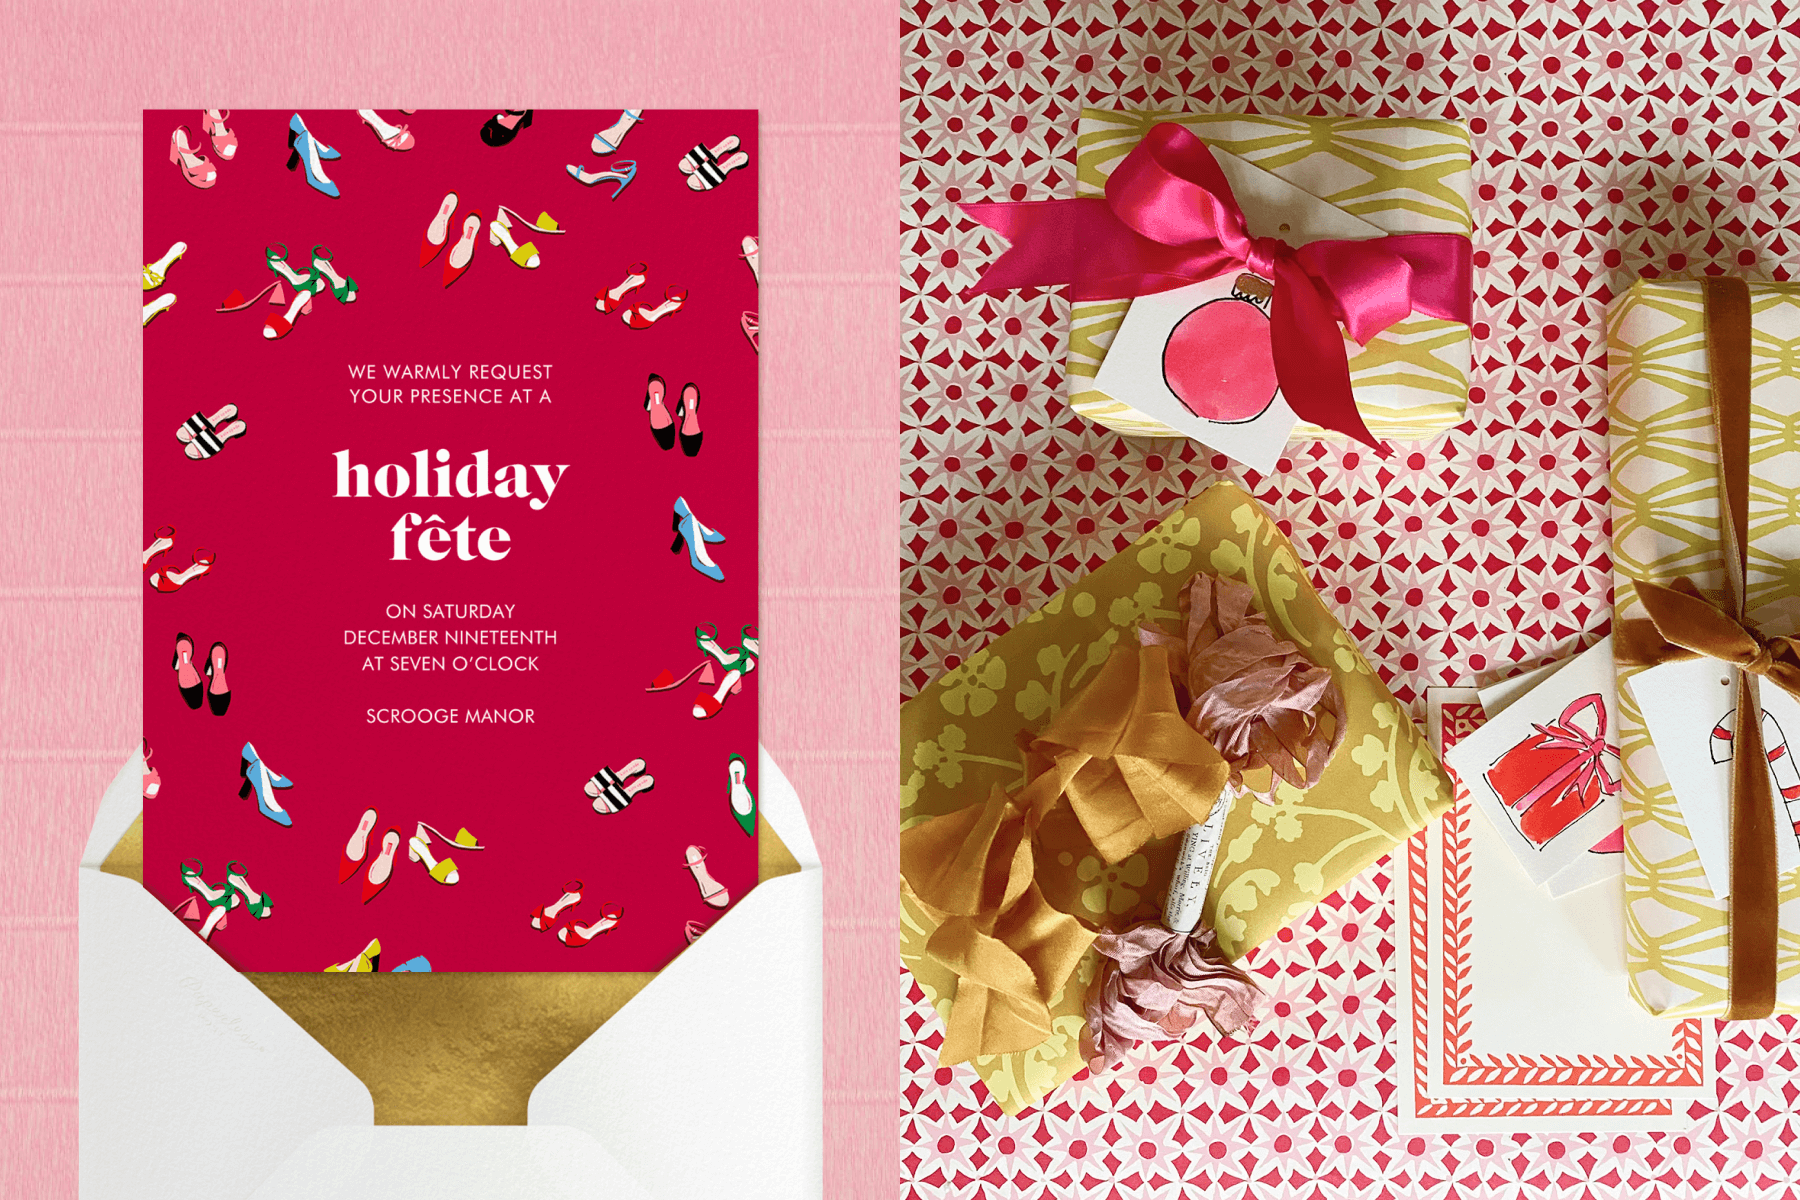 left: A red holiday party invitation with colorful high heeled shoes around the border. Right: An overhead photo of yellow-wrapped gifts on a red and white patterned background.